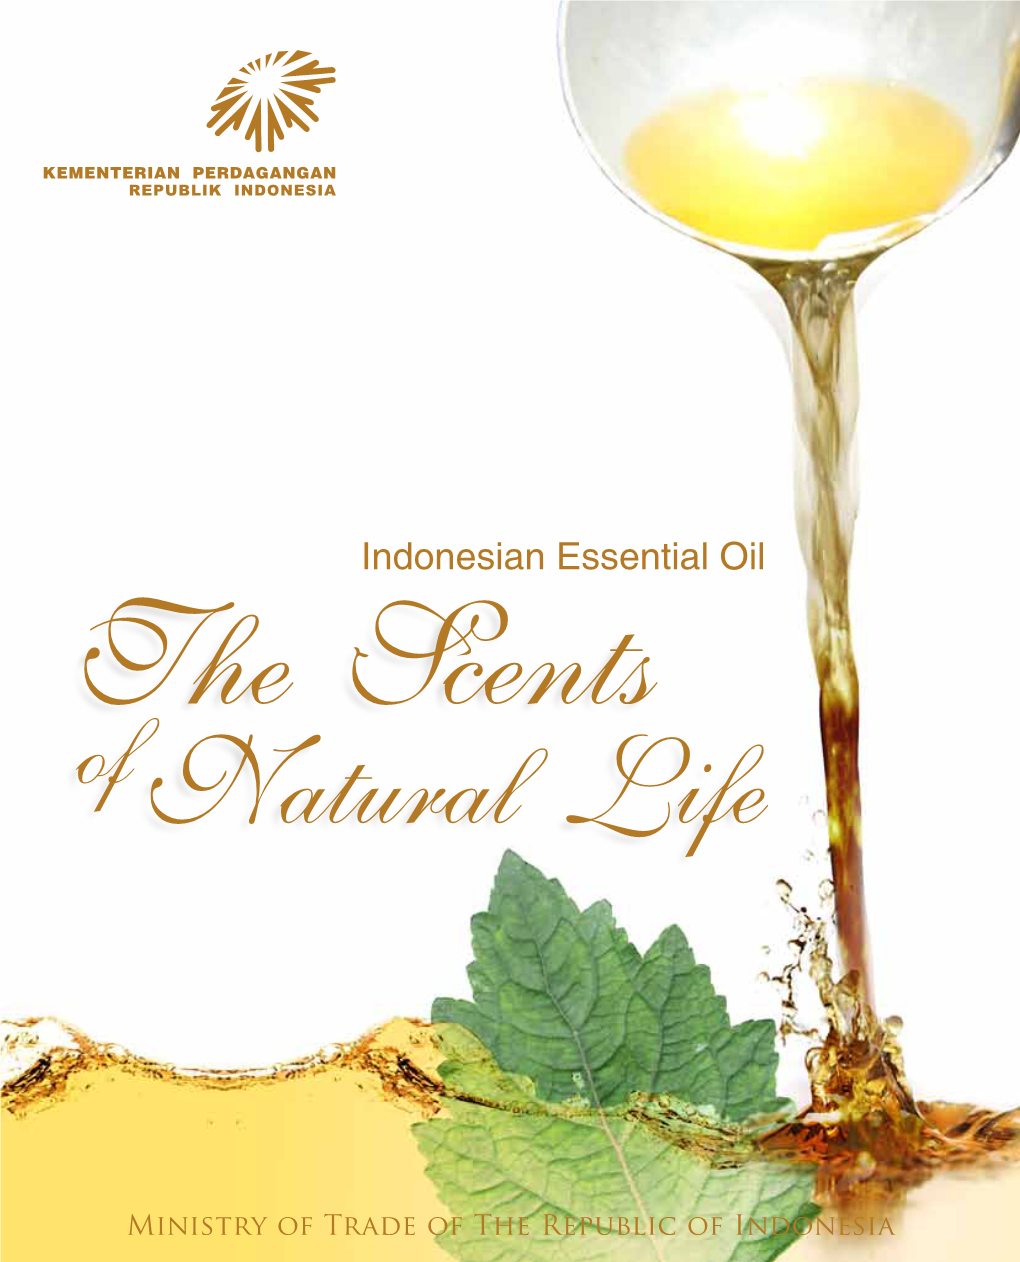 Indonesian Essential Oils 1 2 Indonesian Essential Oils Indonesian Essential Oils I Ii Indonesian Essential Oils Minister of Trade Republic of Indonesia